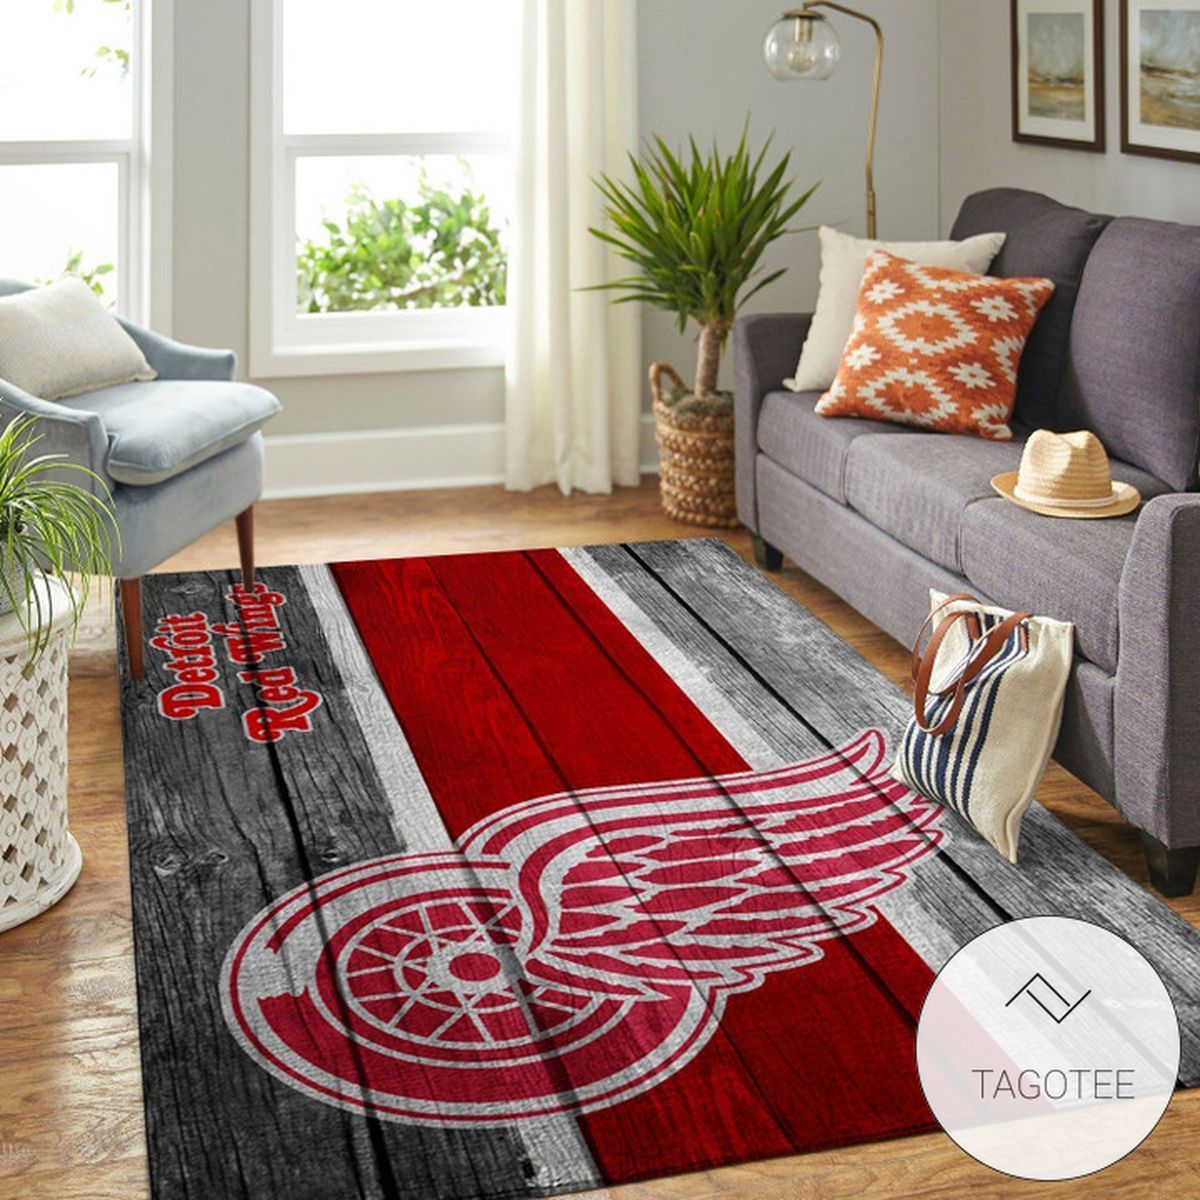 Detroit Red Wings Team Logo Wooden Style Nice Gift Home Decor Rectangle Area Rug